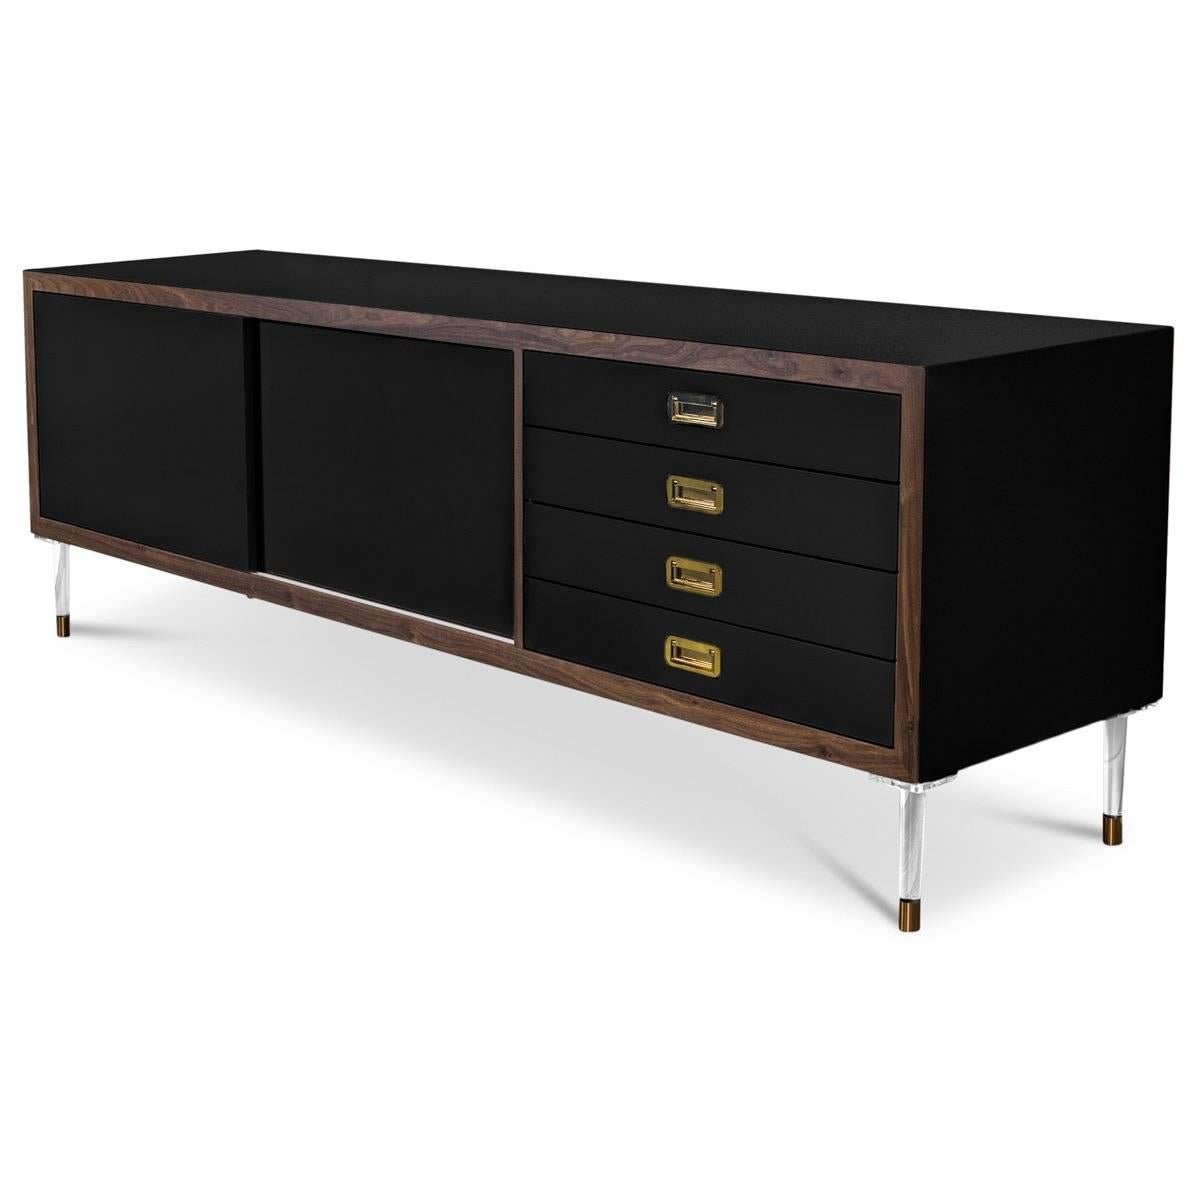 Introducing our new St. Martin Credenza featuring two sliding doors and four drawers to maximize its functionality while still being stylish and chic. This retro-modern design features an oiled walnut trim, brass hardware, our famous Black lacquer